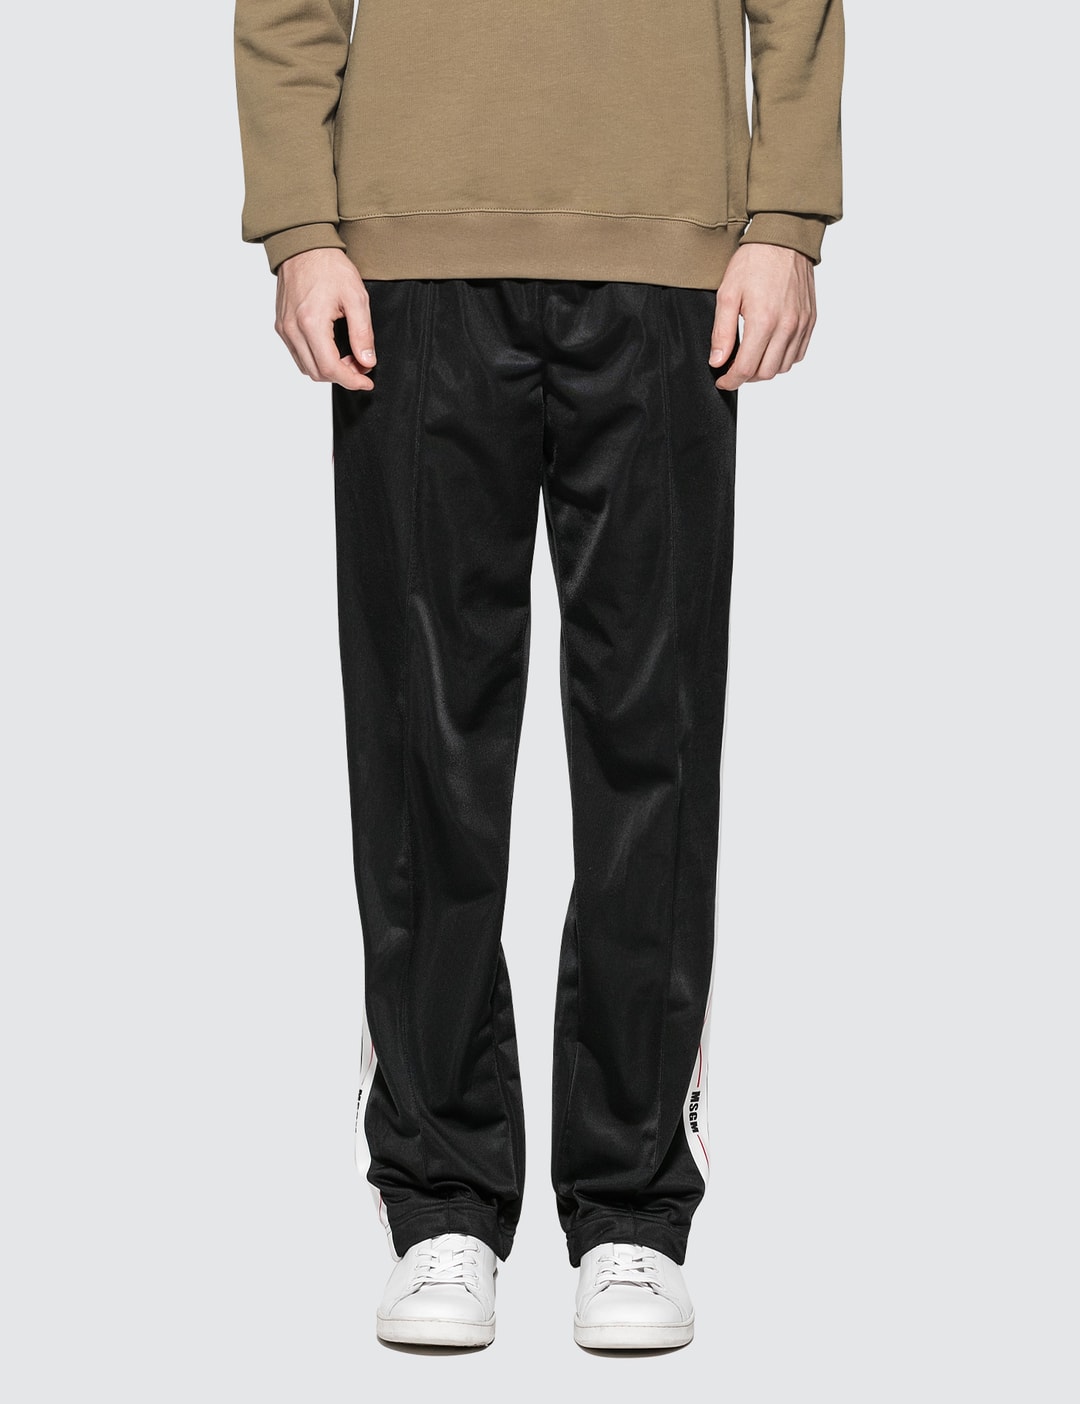 MSGM - Triacetate Pants | HBX - Globally Curated Fashion and Lifestyle ...